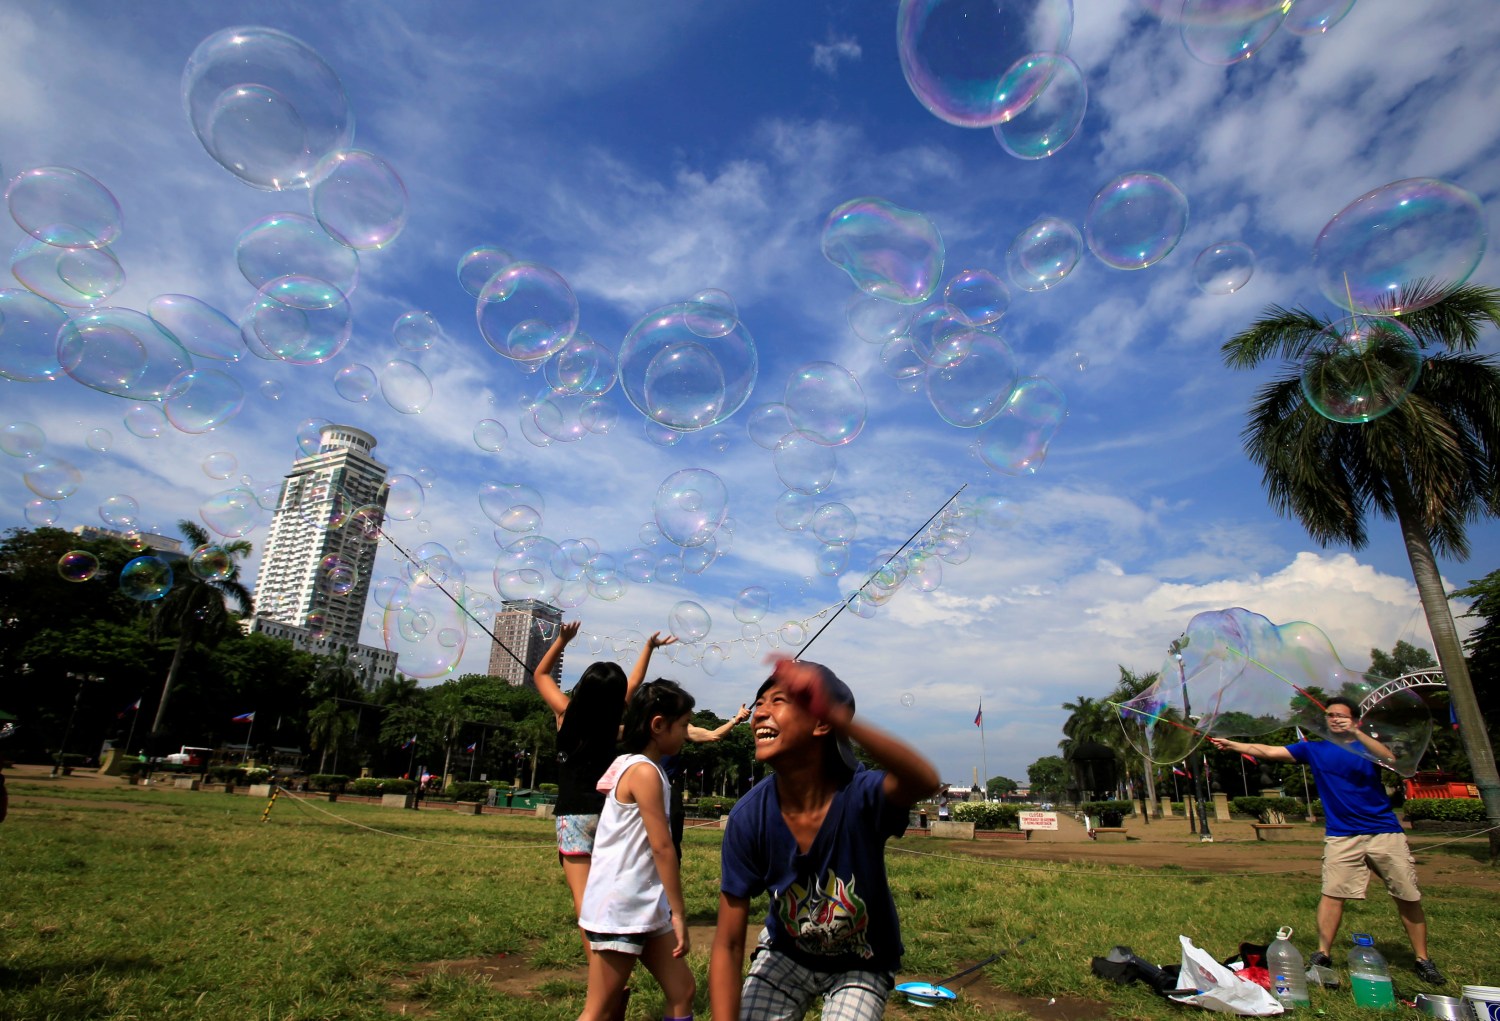 Children play with soap bubbles created by a street performer at Rizal park in Luneta, metro Manila, Philippines May 16, 2018. REUTERS/Romeo Ranoco     TPX IMAGES OF THE DAY - RC19387EB200